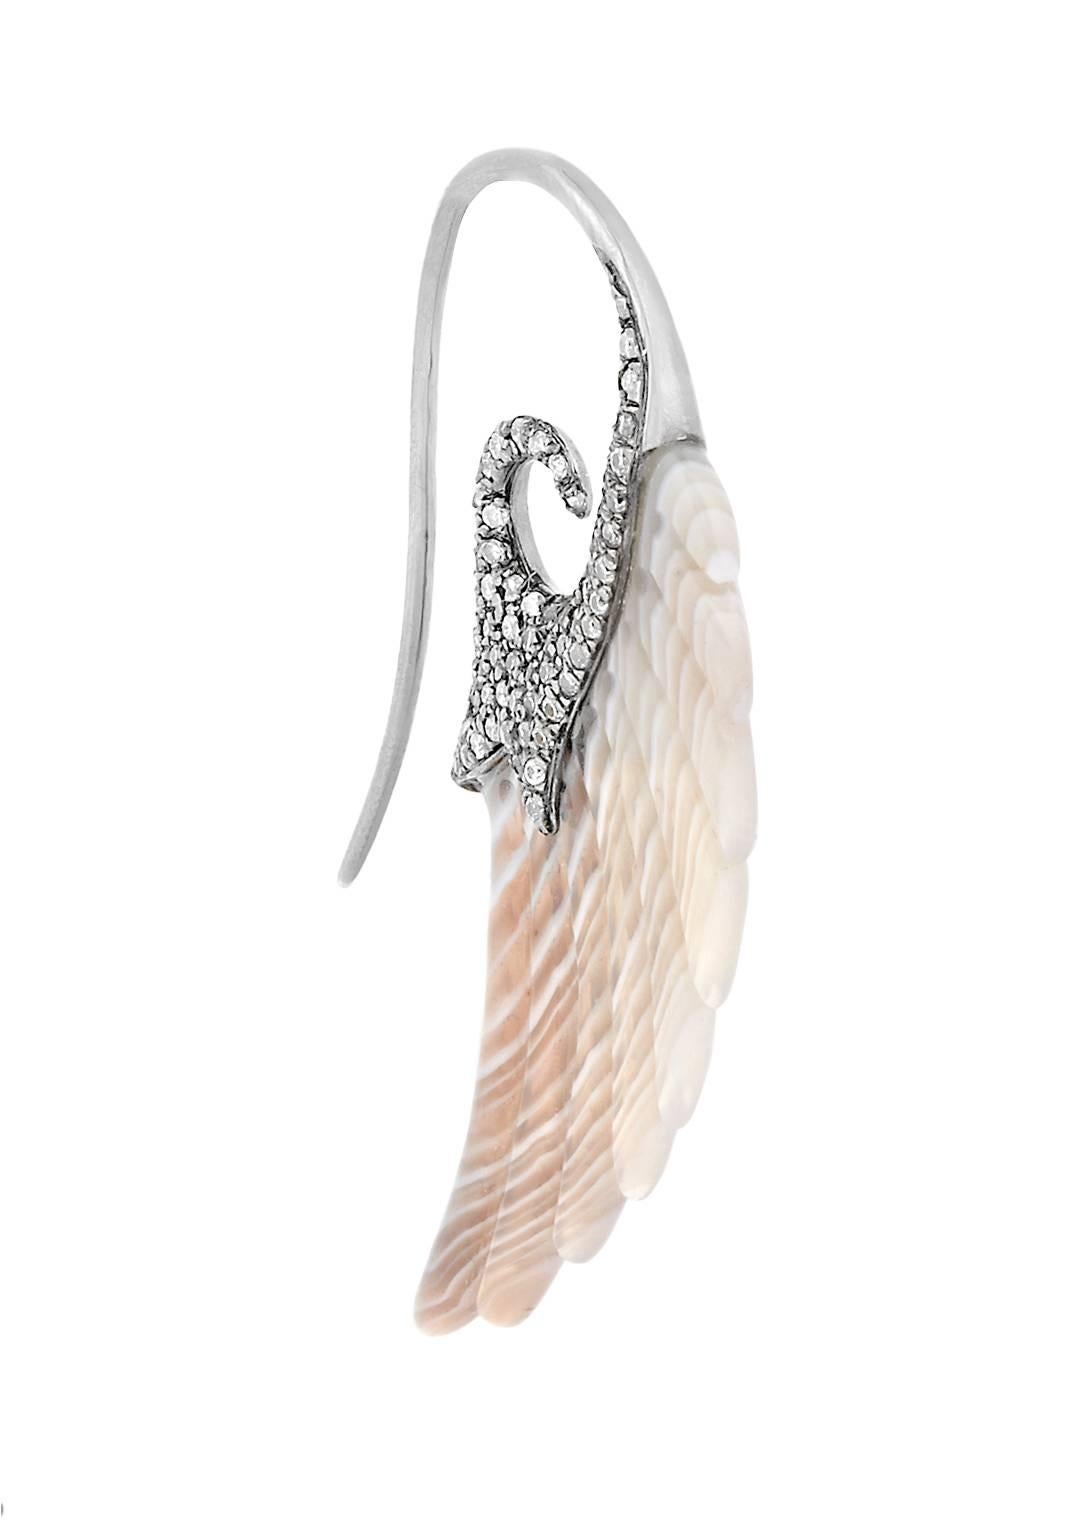 Noor Fares' iconic Fly Me to the Moon Wing Earrings
* Carved Botswana Agate
* Black gold embellished with diamond pave on one side
* Diamond weight: 0.85cts
* Hook
NOTE: Agate varies in colour from Grey to Brown to Orange and each carved piece